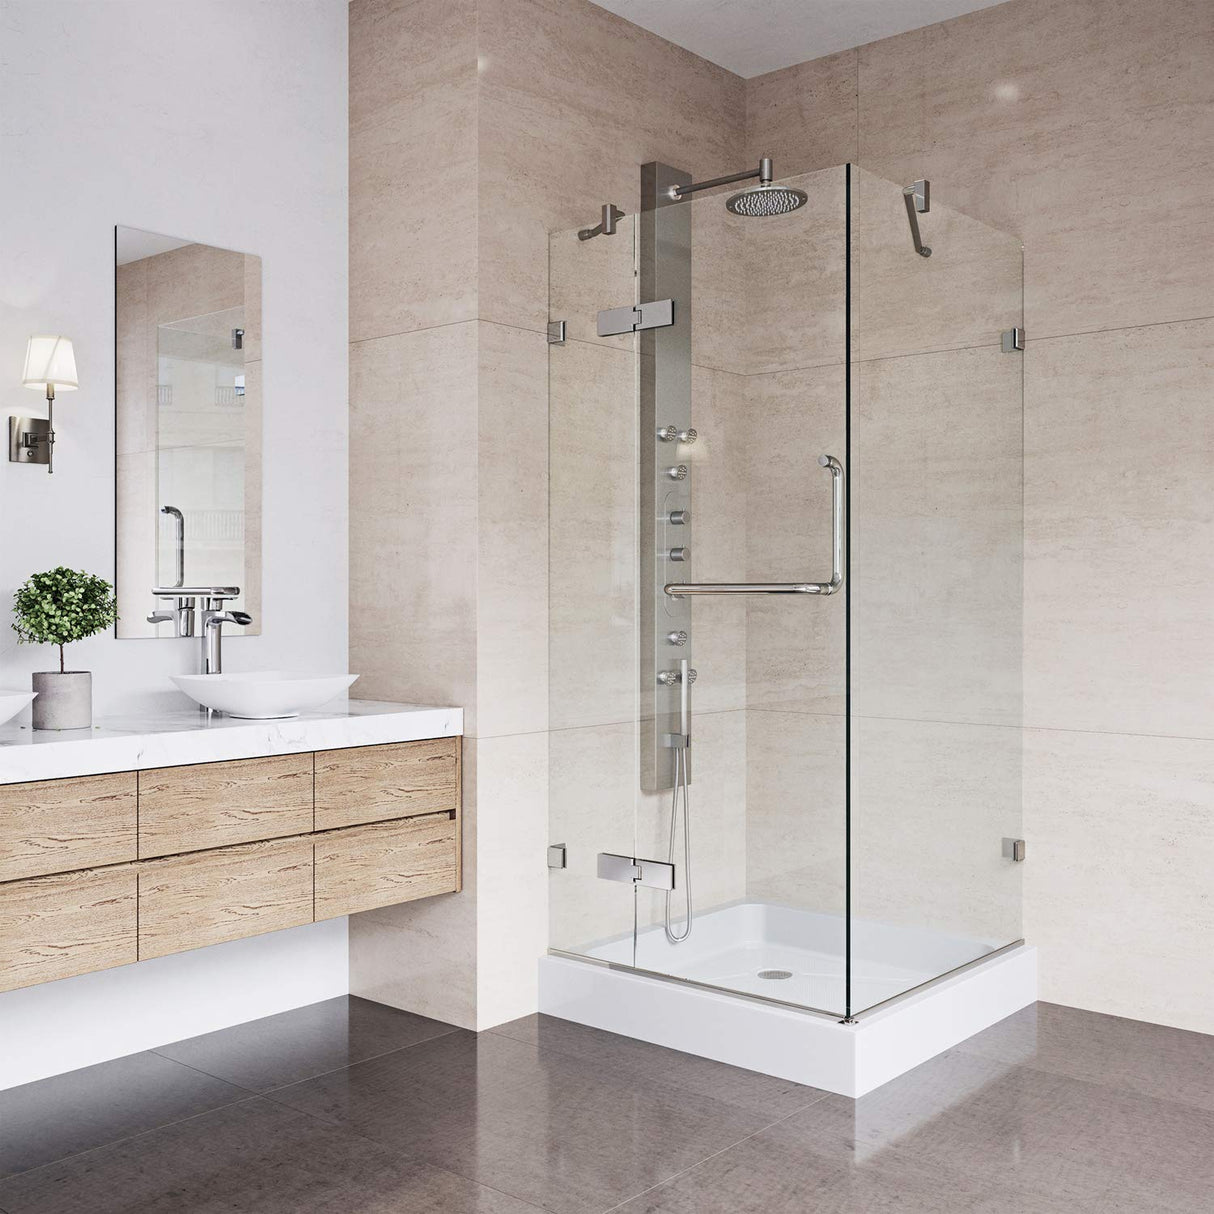 VIGO 32 in. x 32 in. x 79 in. Monteray Frameless Hinged Square Shower Enclosure with Clear 0.38" Tempered Glass and Hardware in Brushed Nickel Finish with Reversible Handle and Base - VG6011BNCL32W